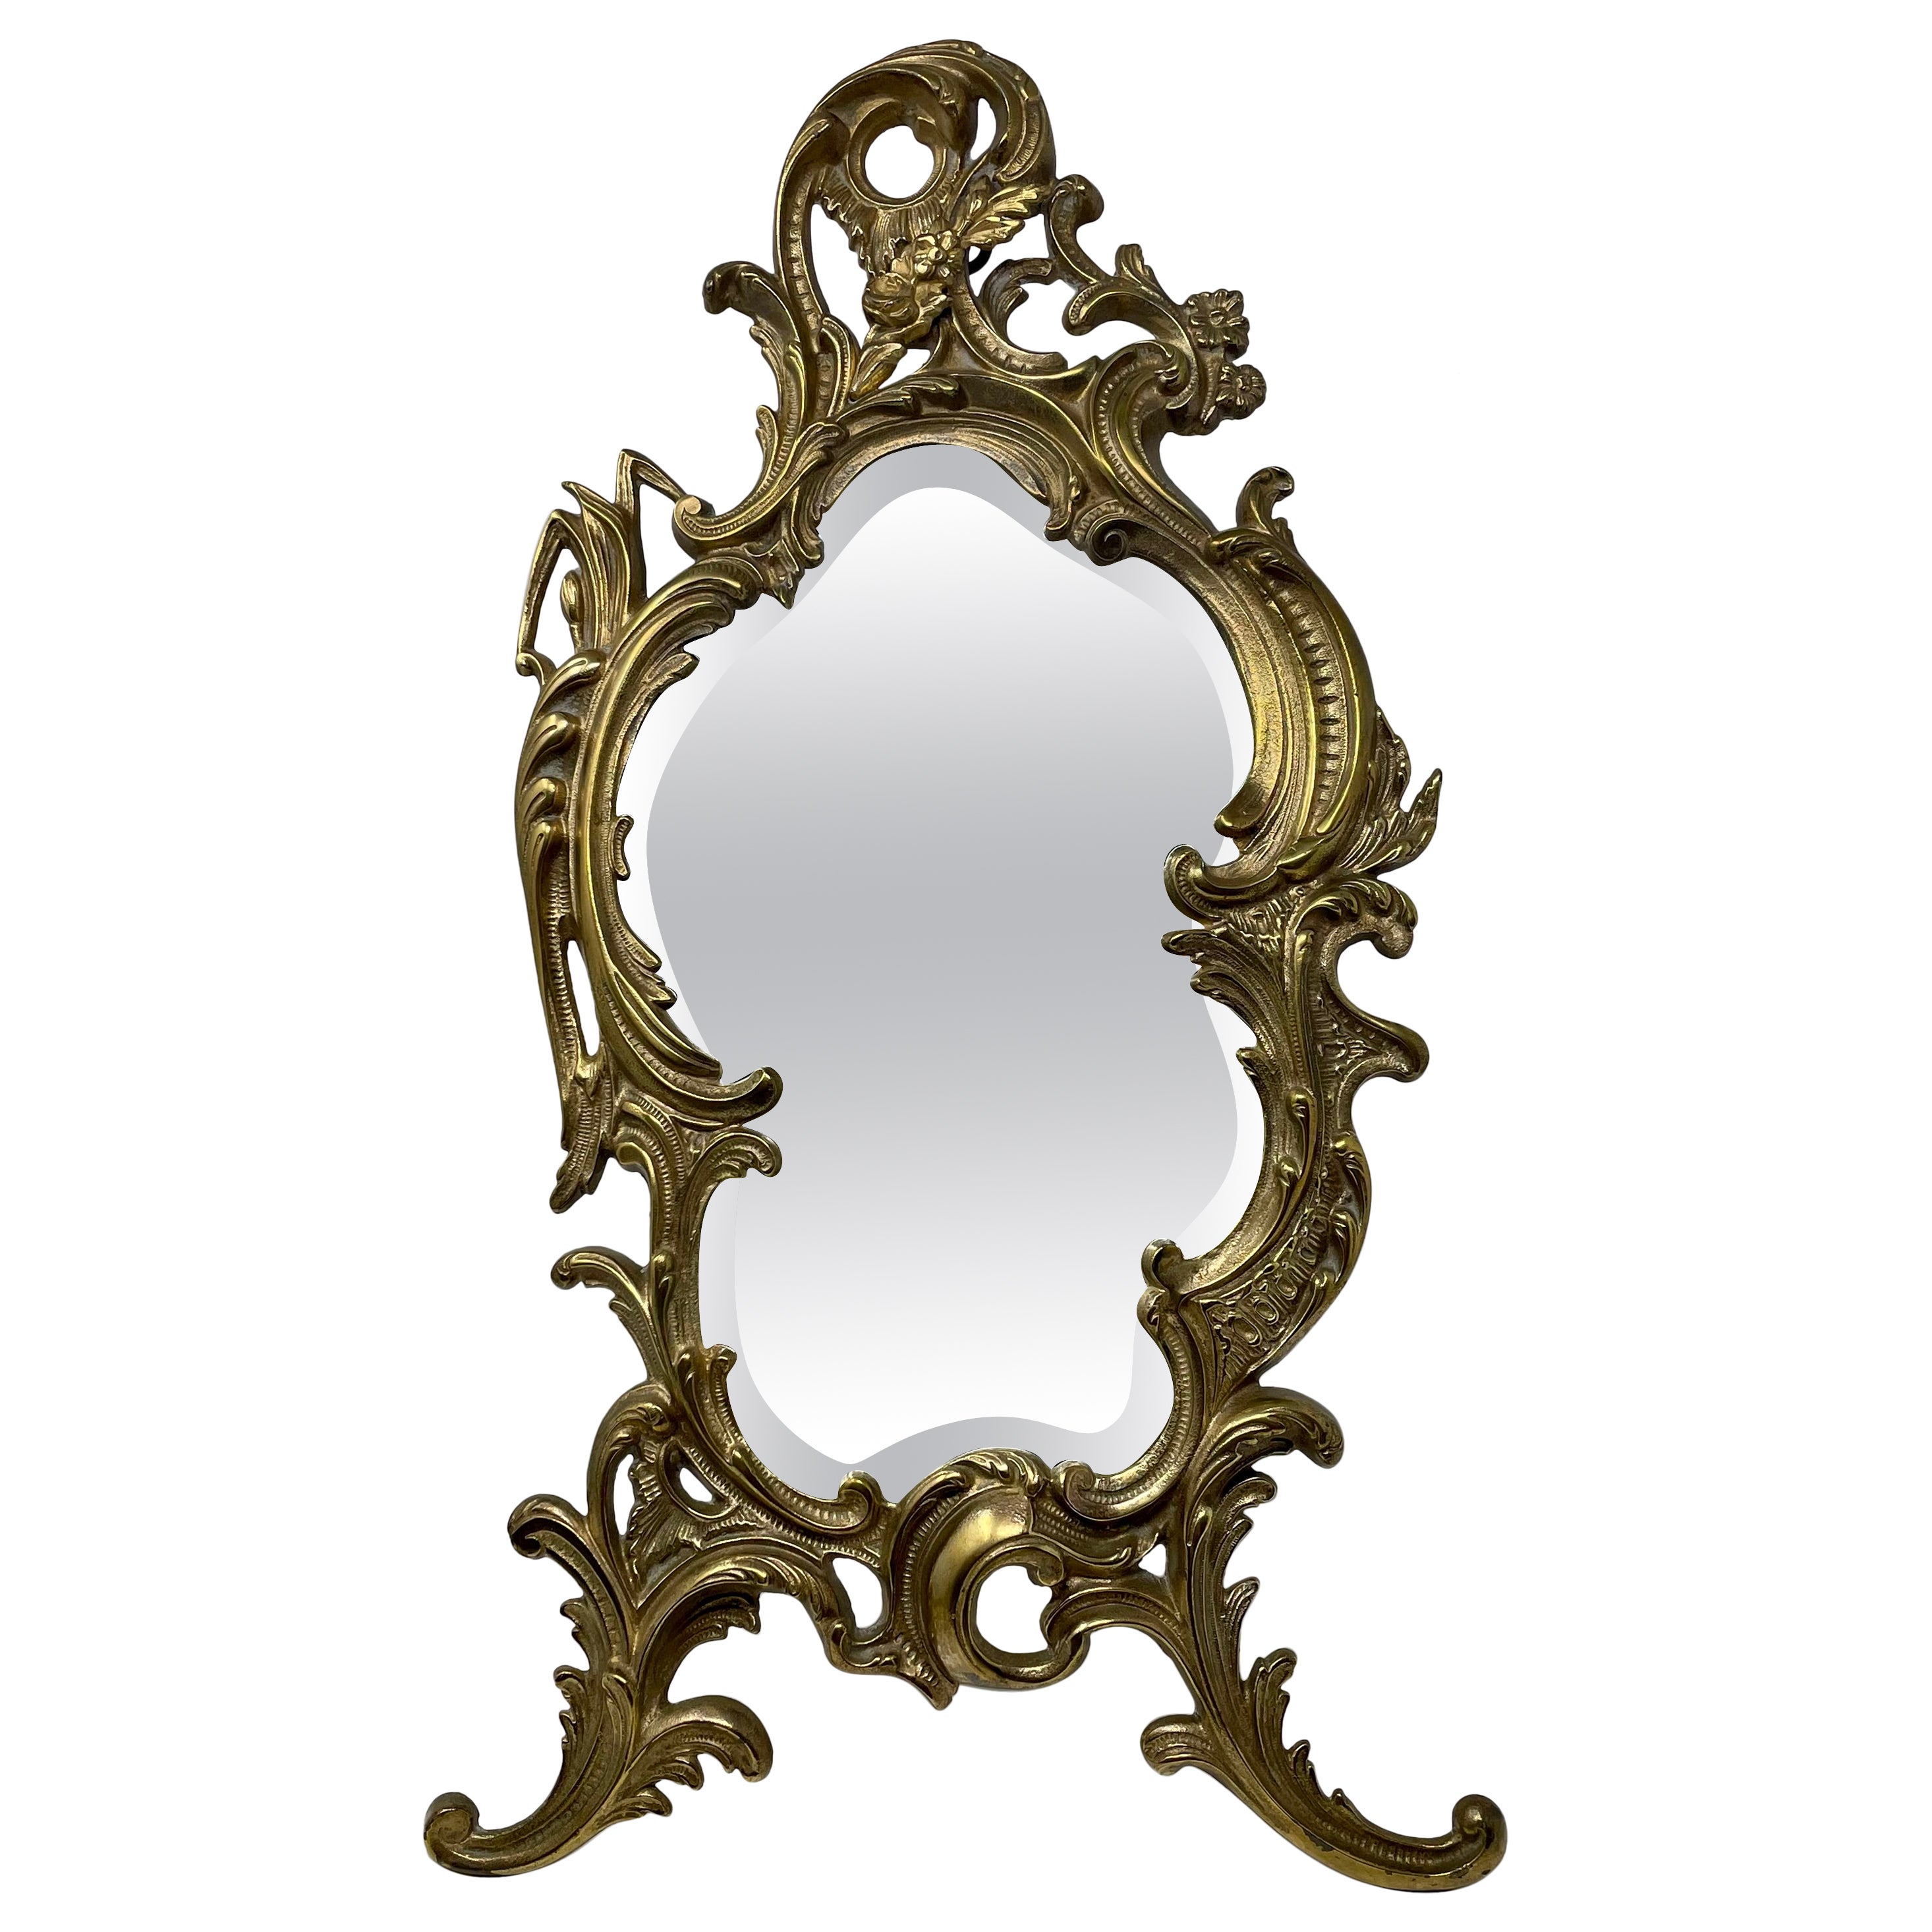 Antique French Gold Bronze Framed Table Mirror with Curve Beveling, Circa 1880.